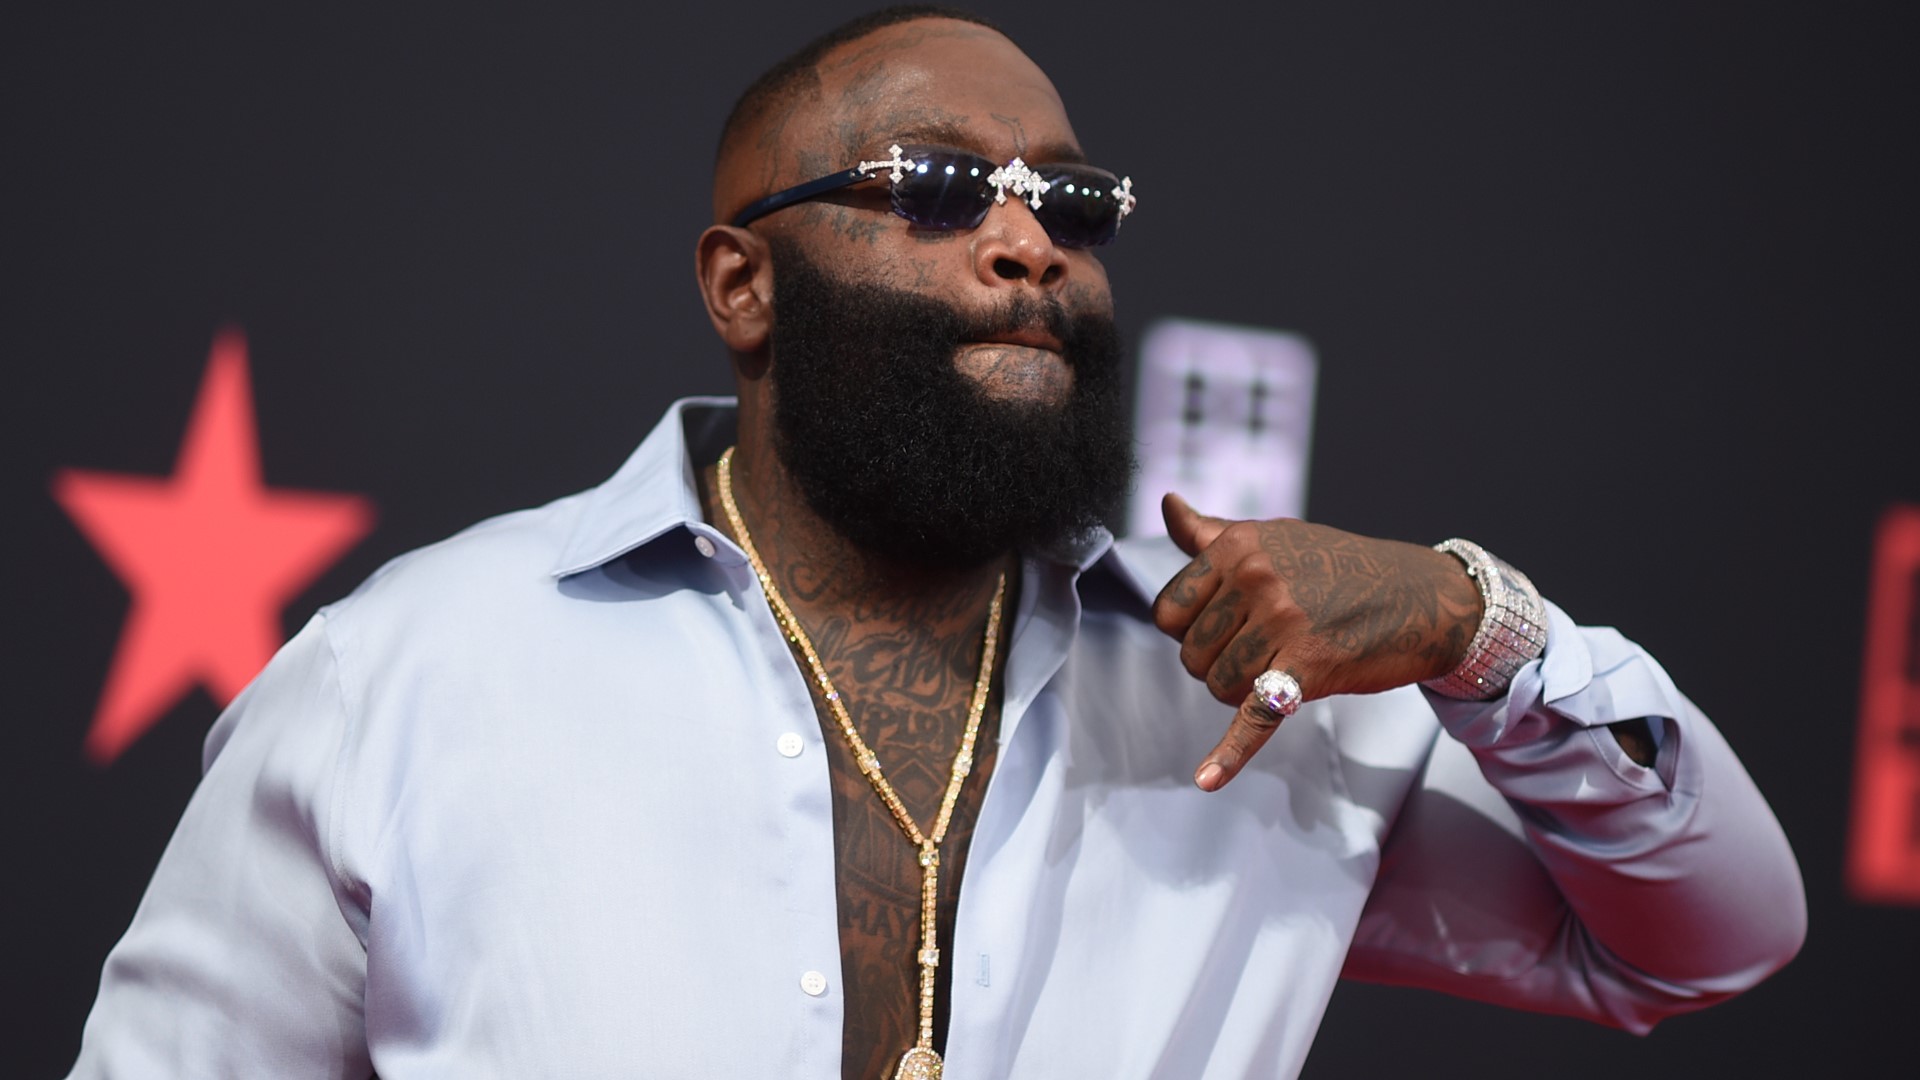 Rick Ross Looks Back At White House Ankle Monitor Incident With Laughter